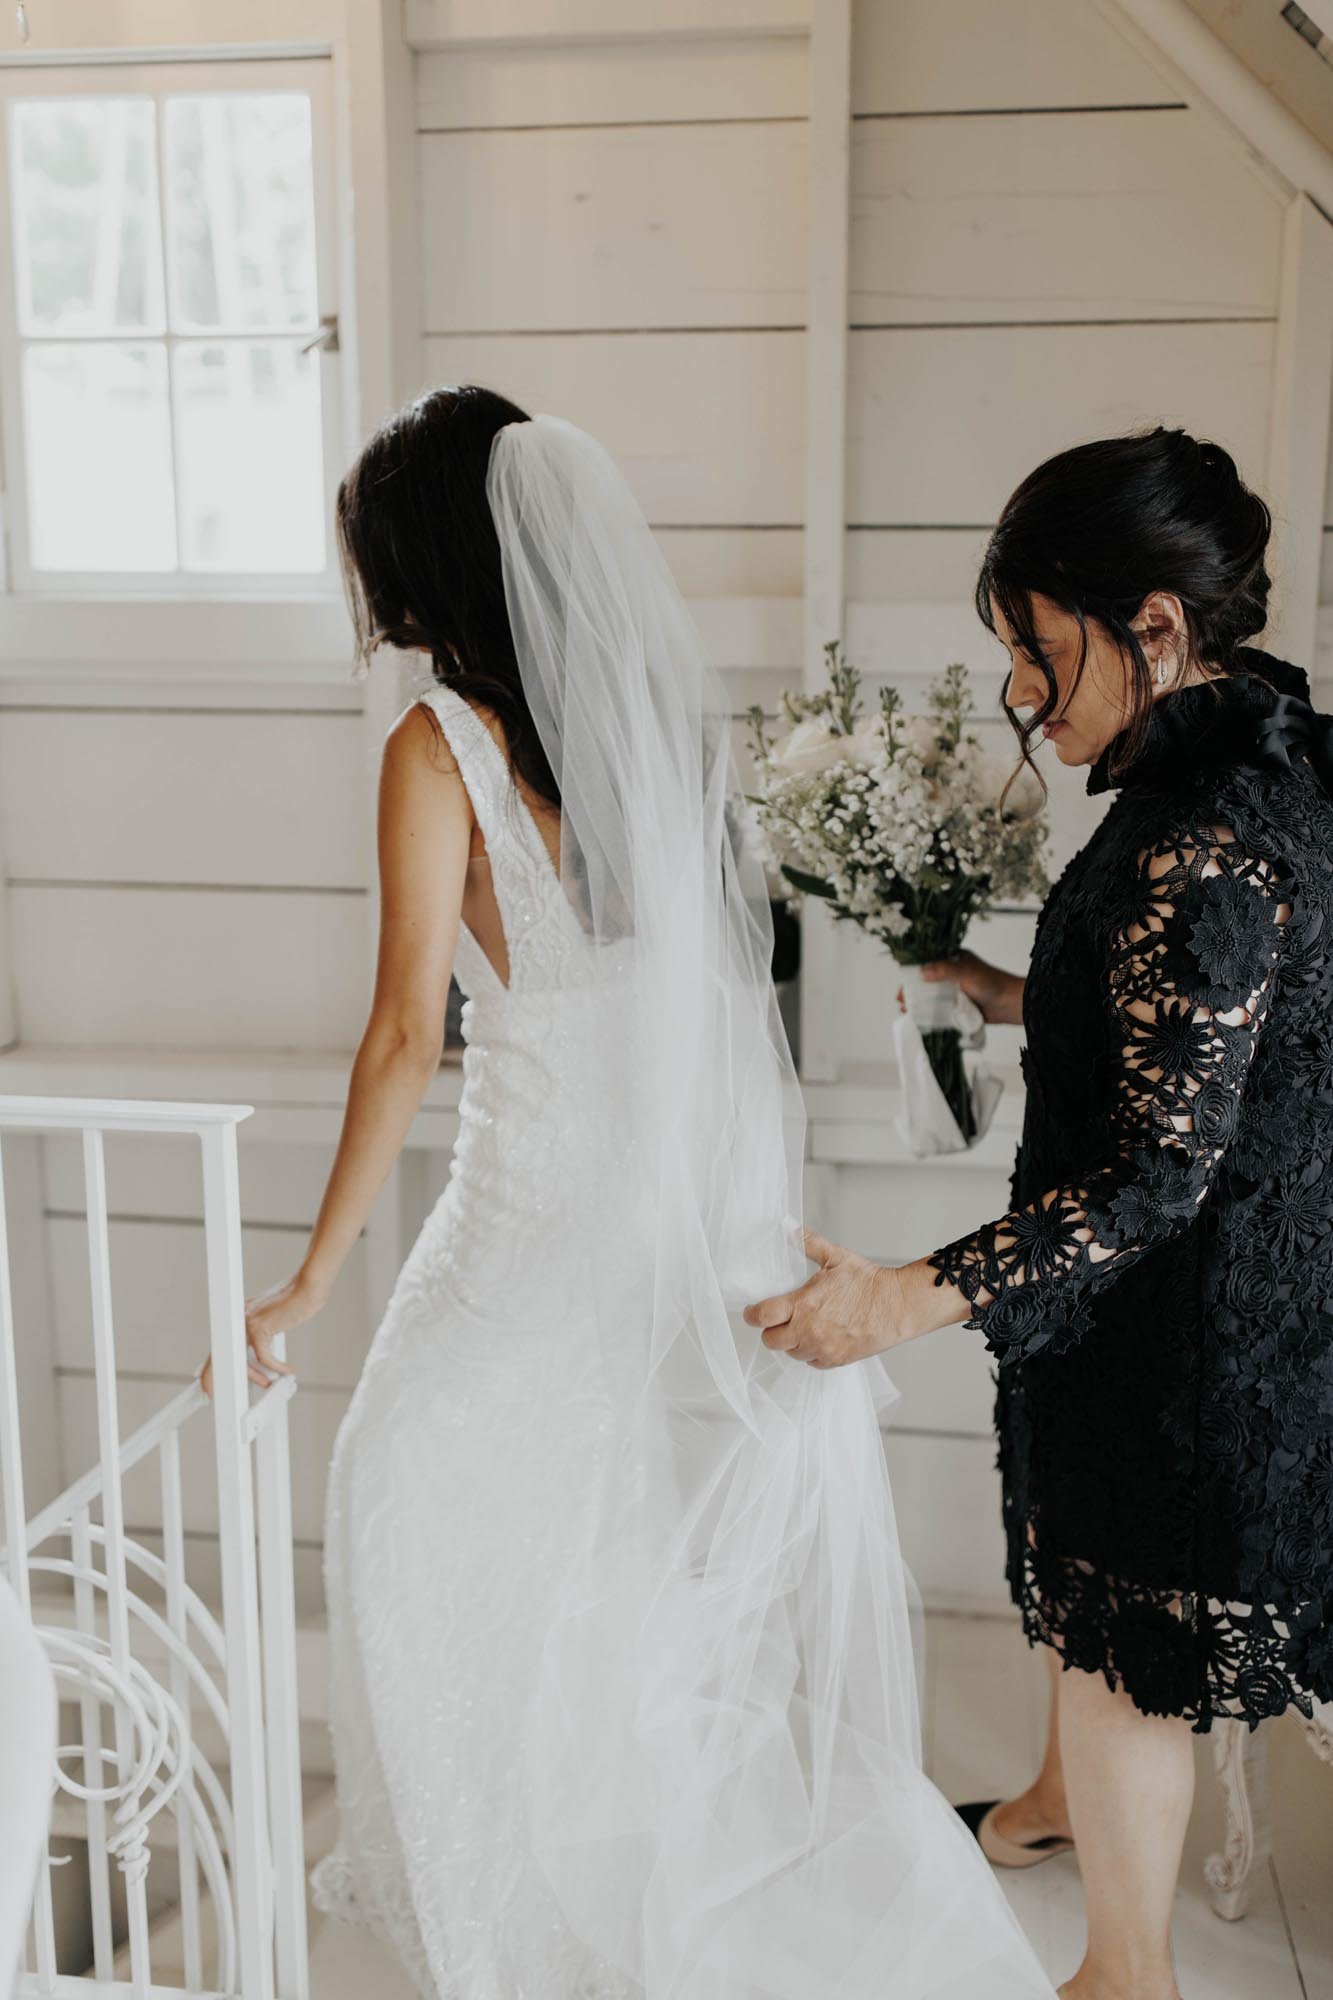  A bride walking down the stairs in her wedding gown and veil with help from her mother carrying her bridal bouquet.  